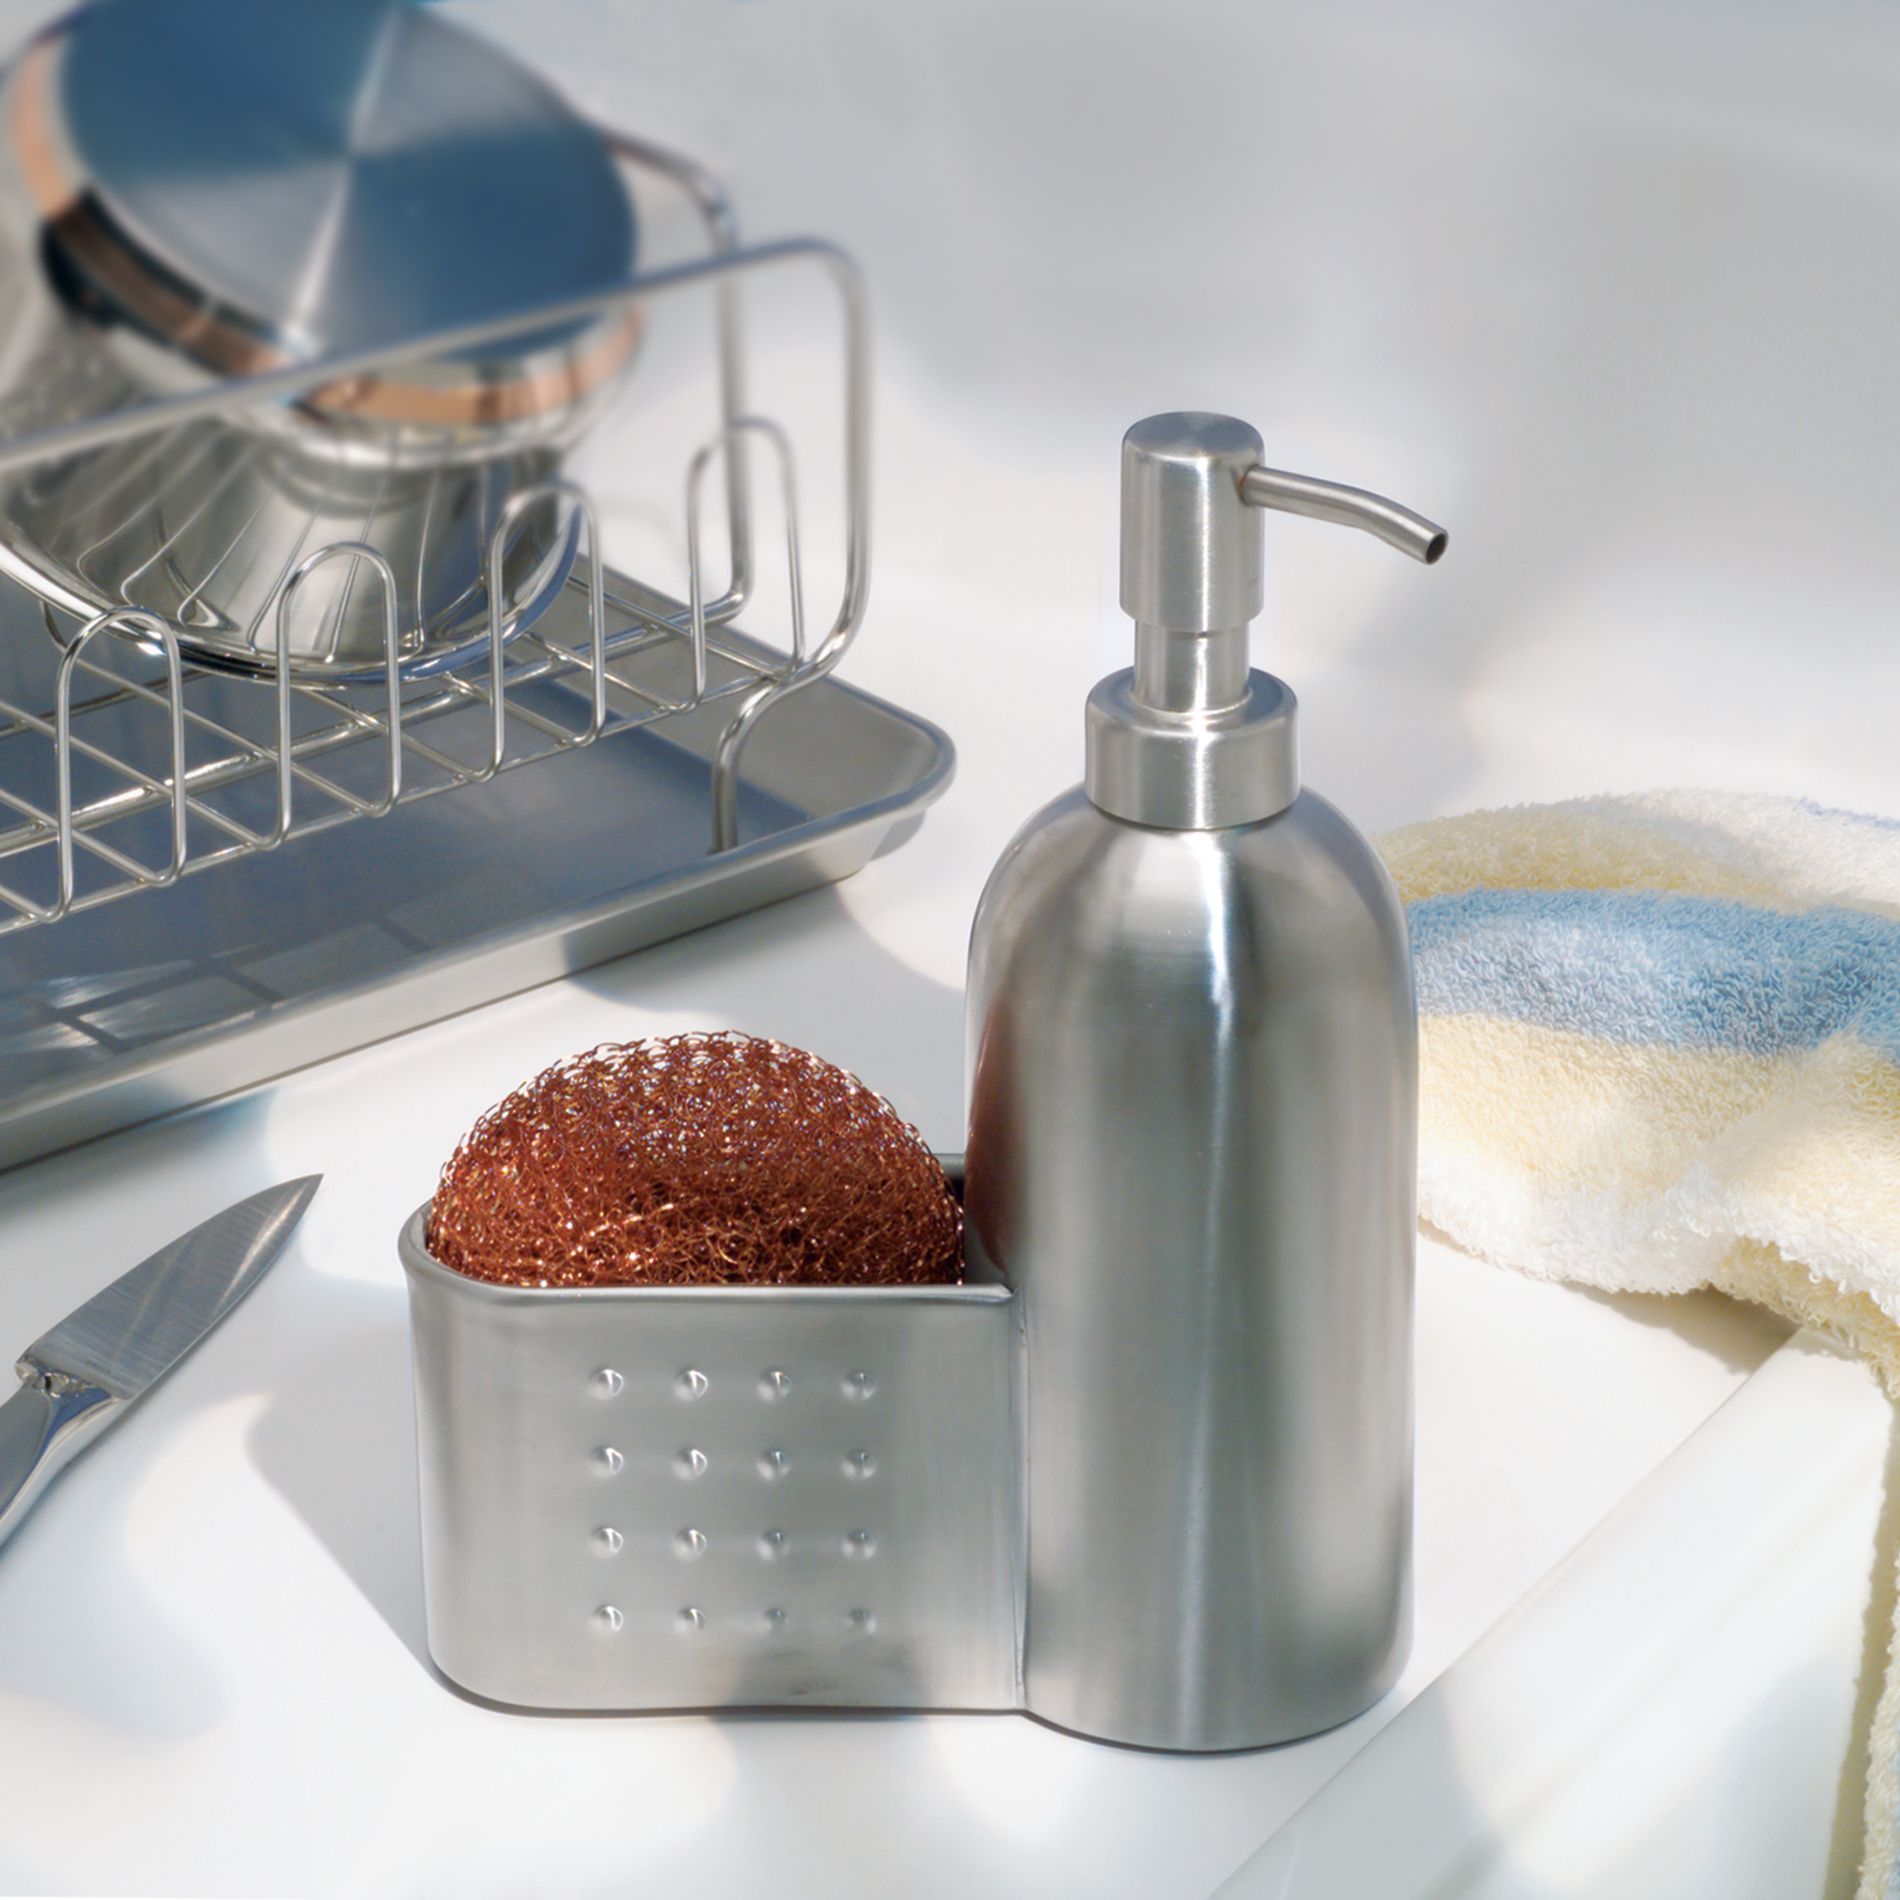 Inter Design Brushed Stainless Steel Soap and Scrub Caddy